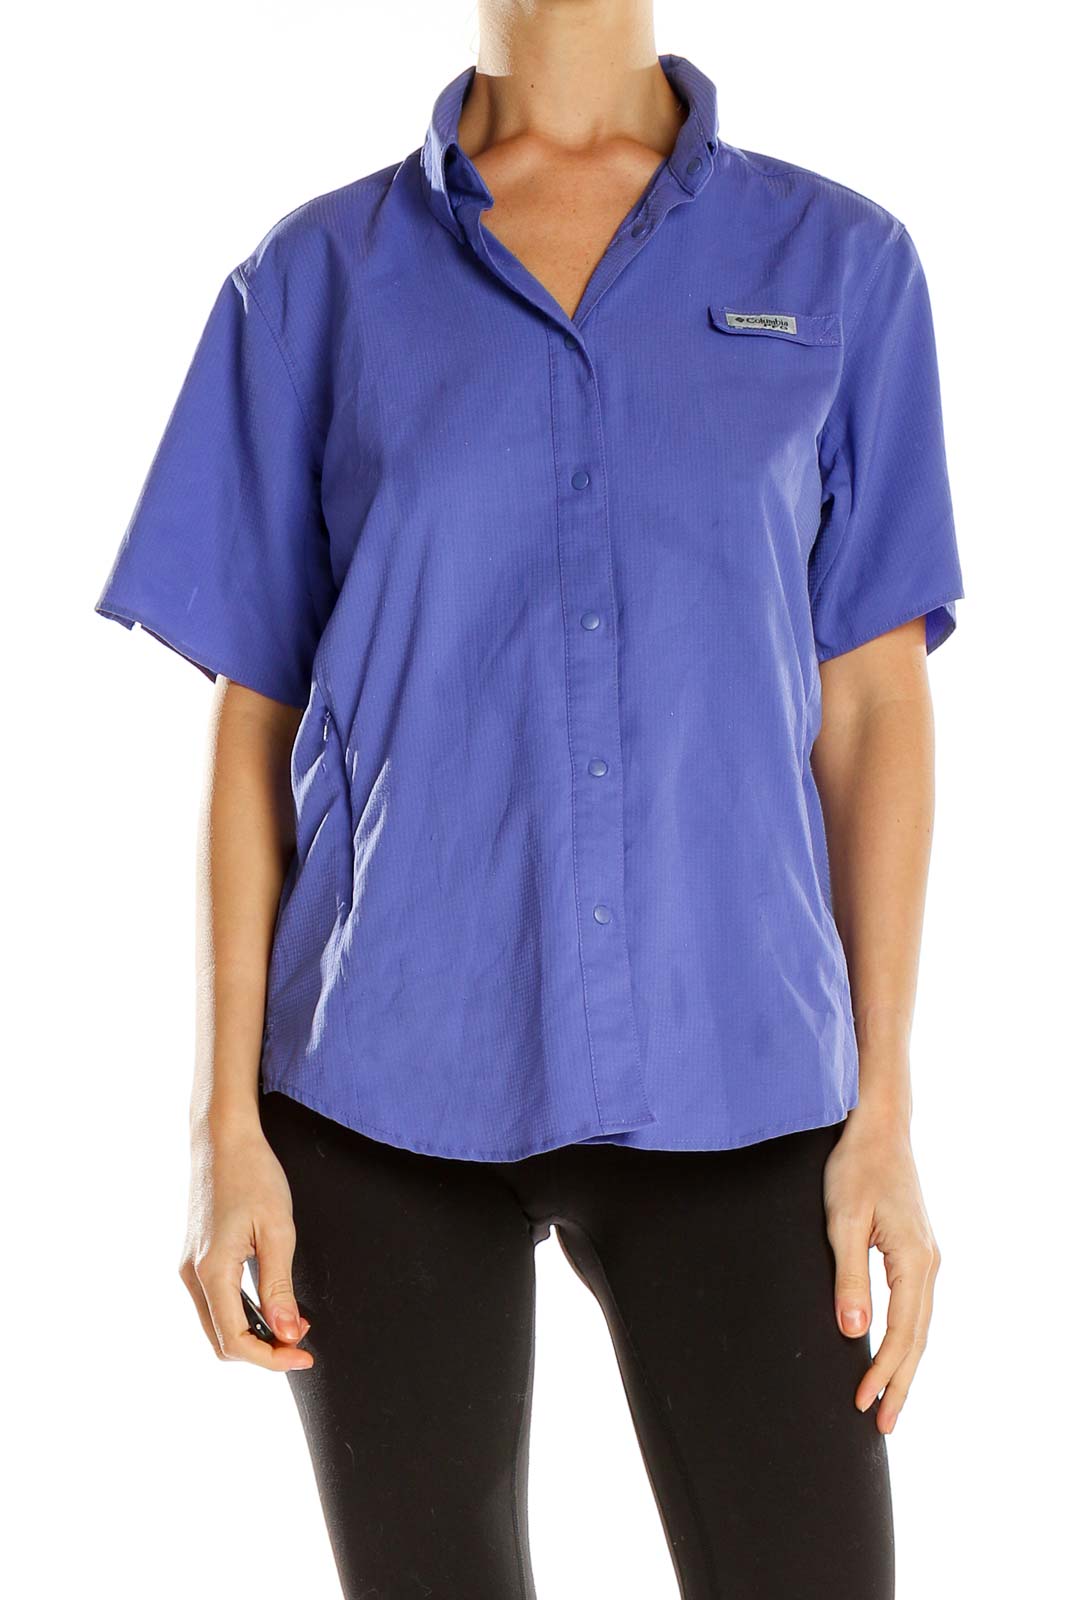 Blue Activewear Polo Shirt Front